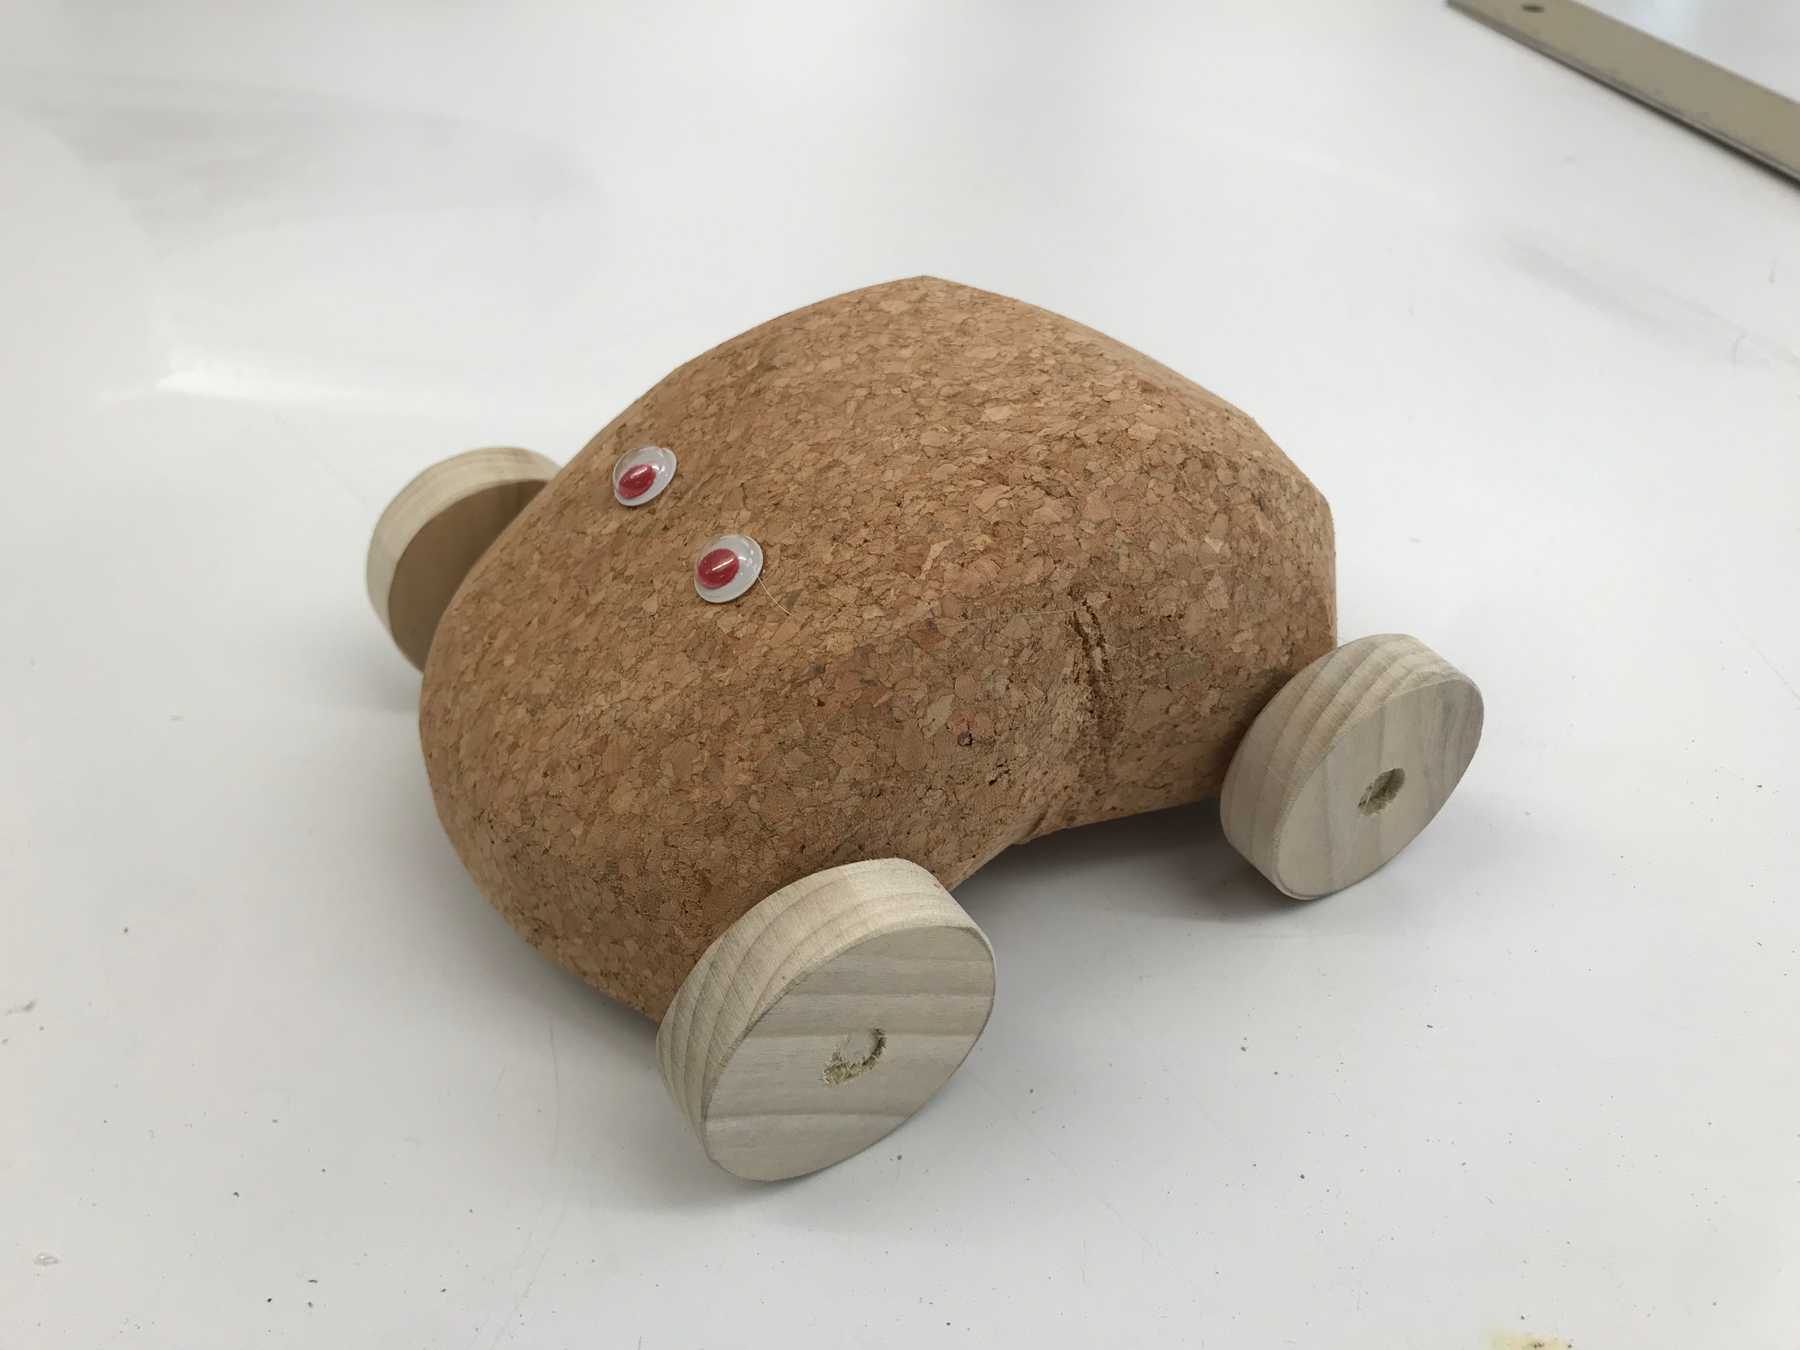 A toy car made of cork and wood